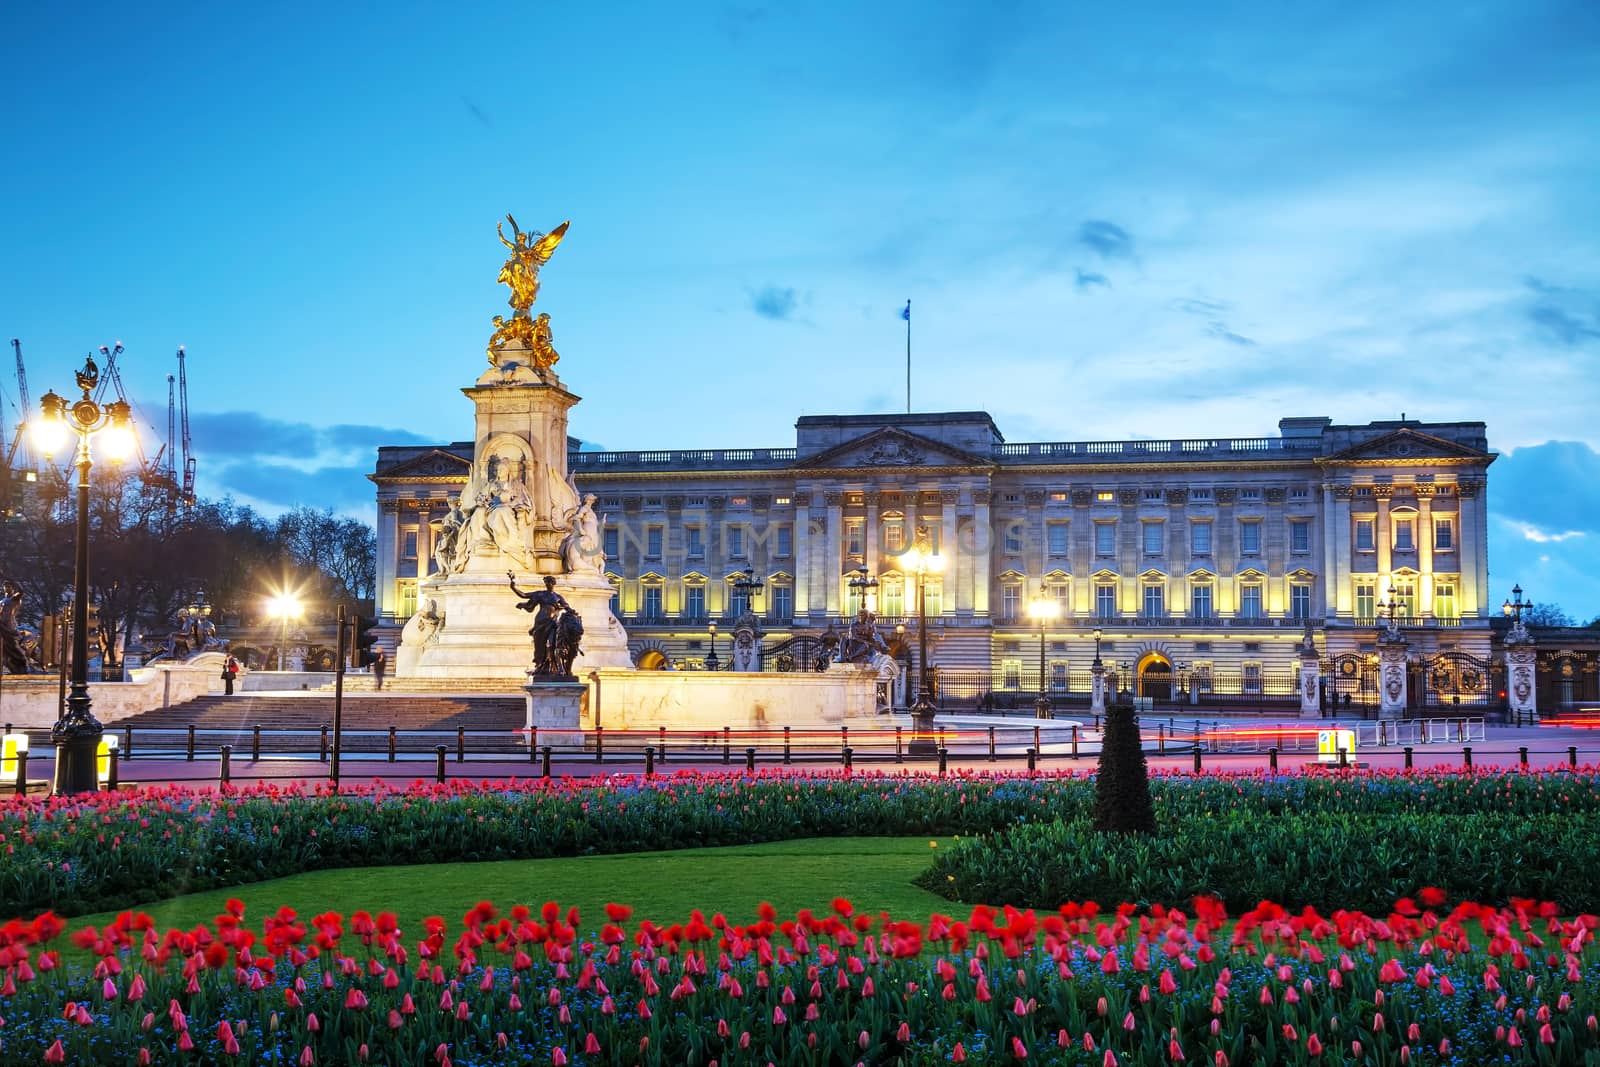 Buckingham palace in London, Great Britain by AndreyKr